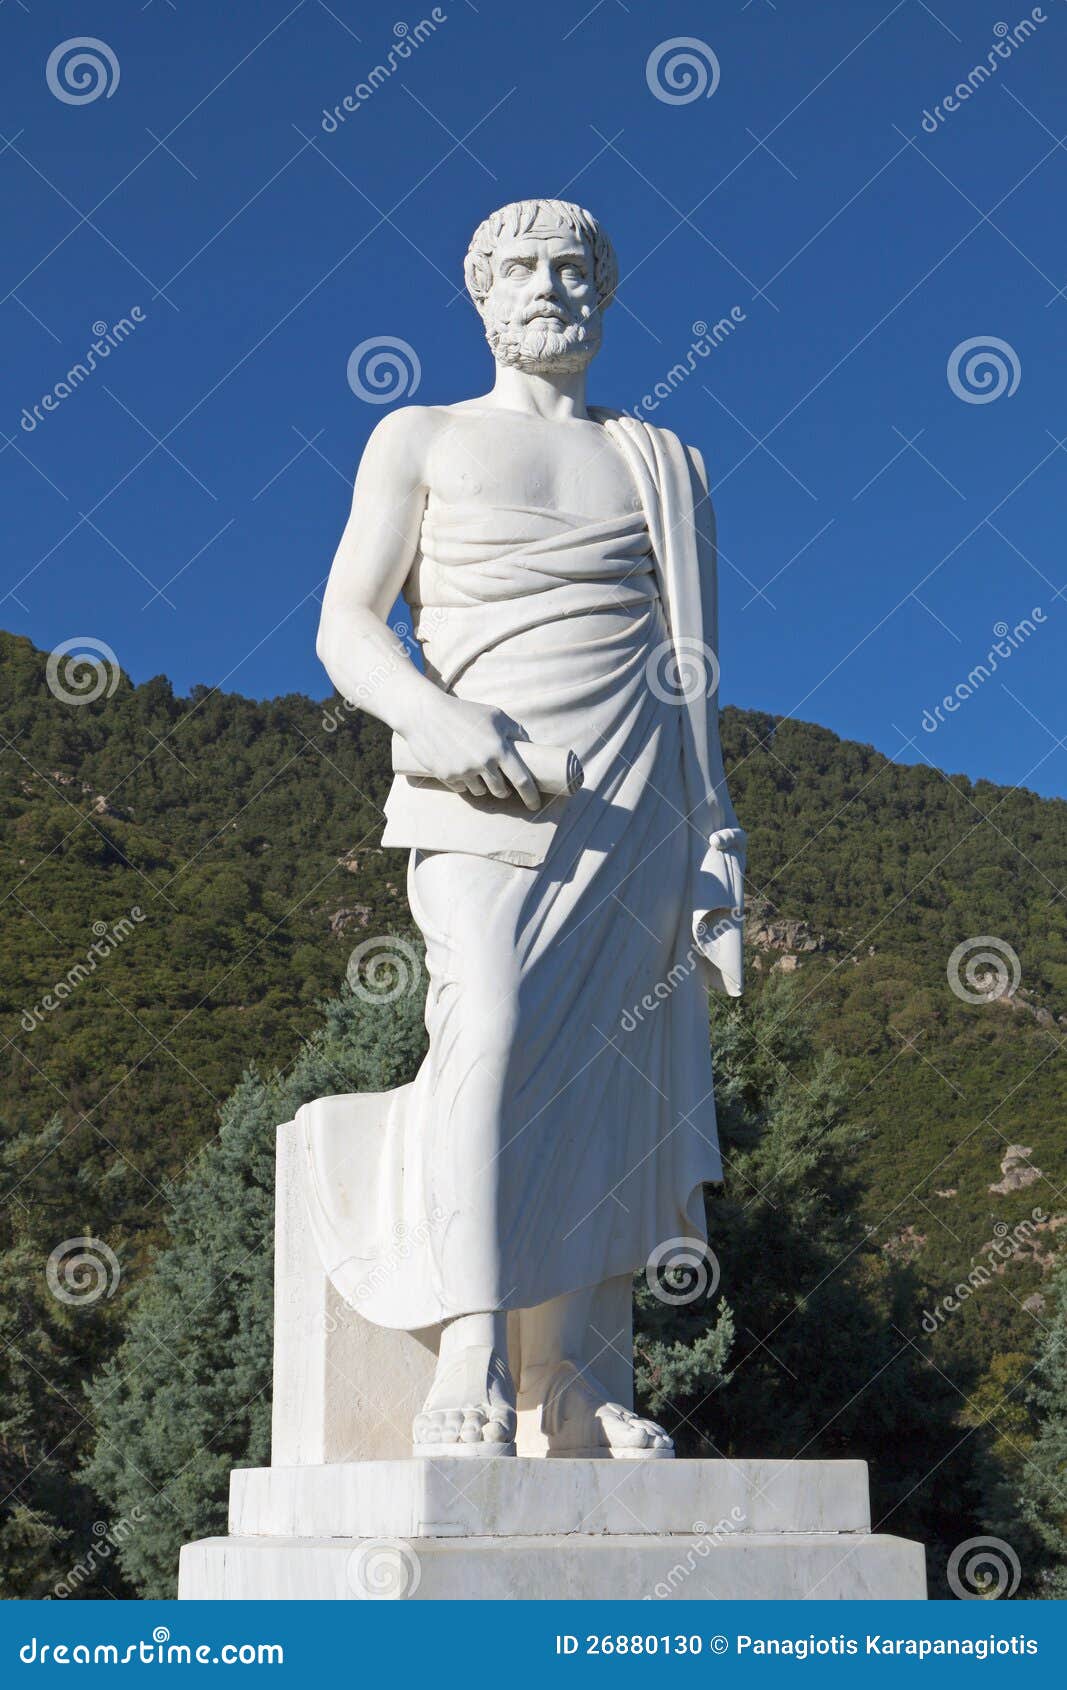 aristotle statue at stageira of greece